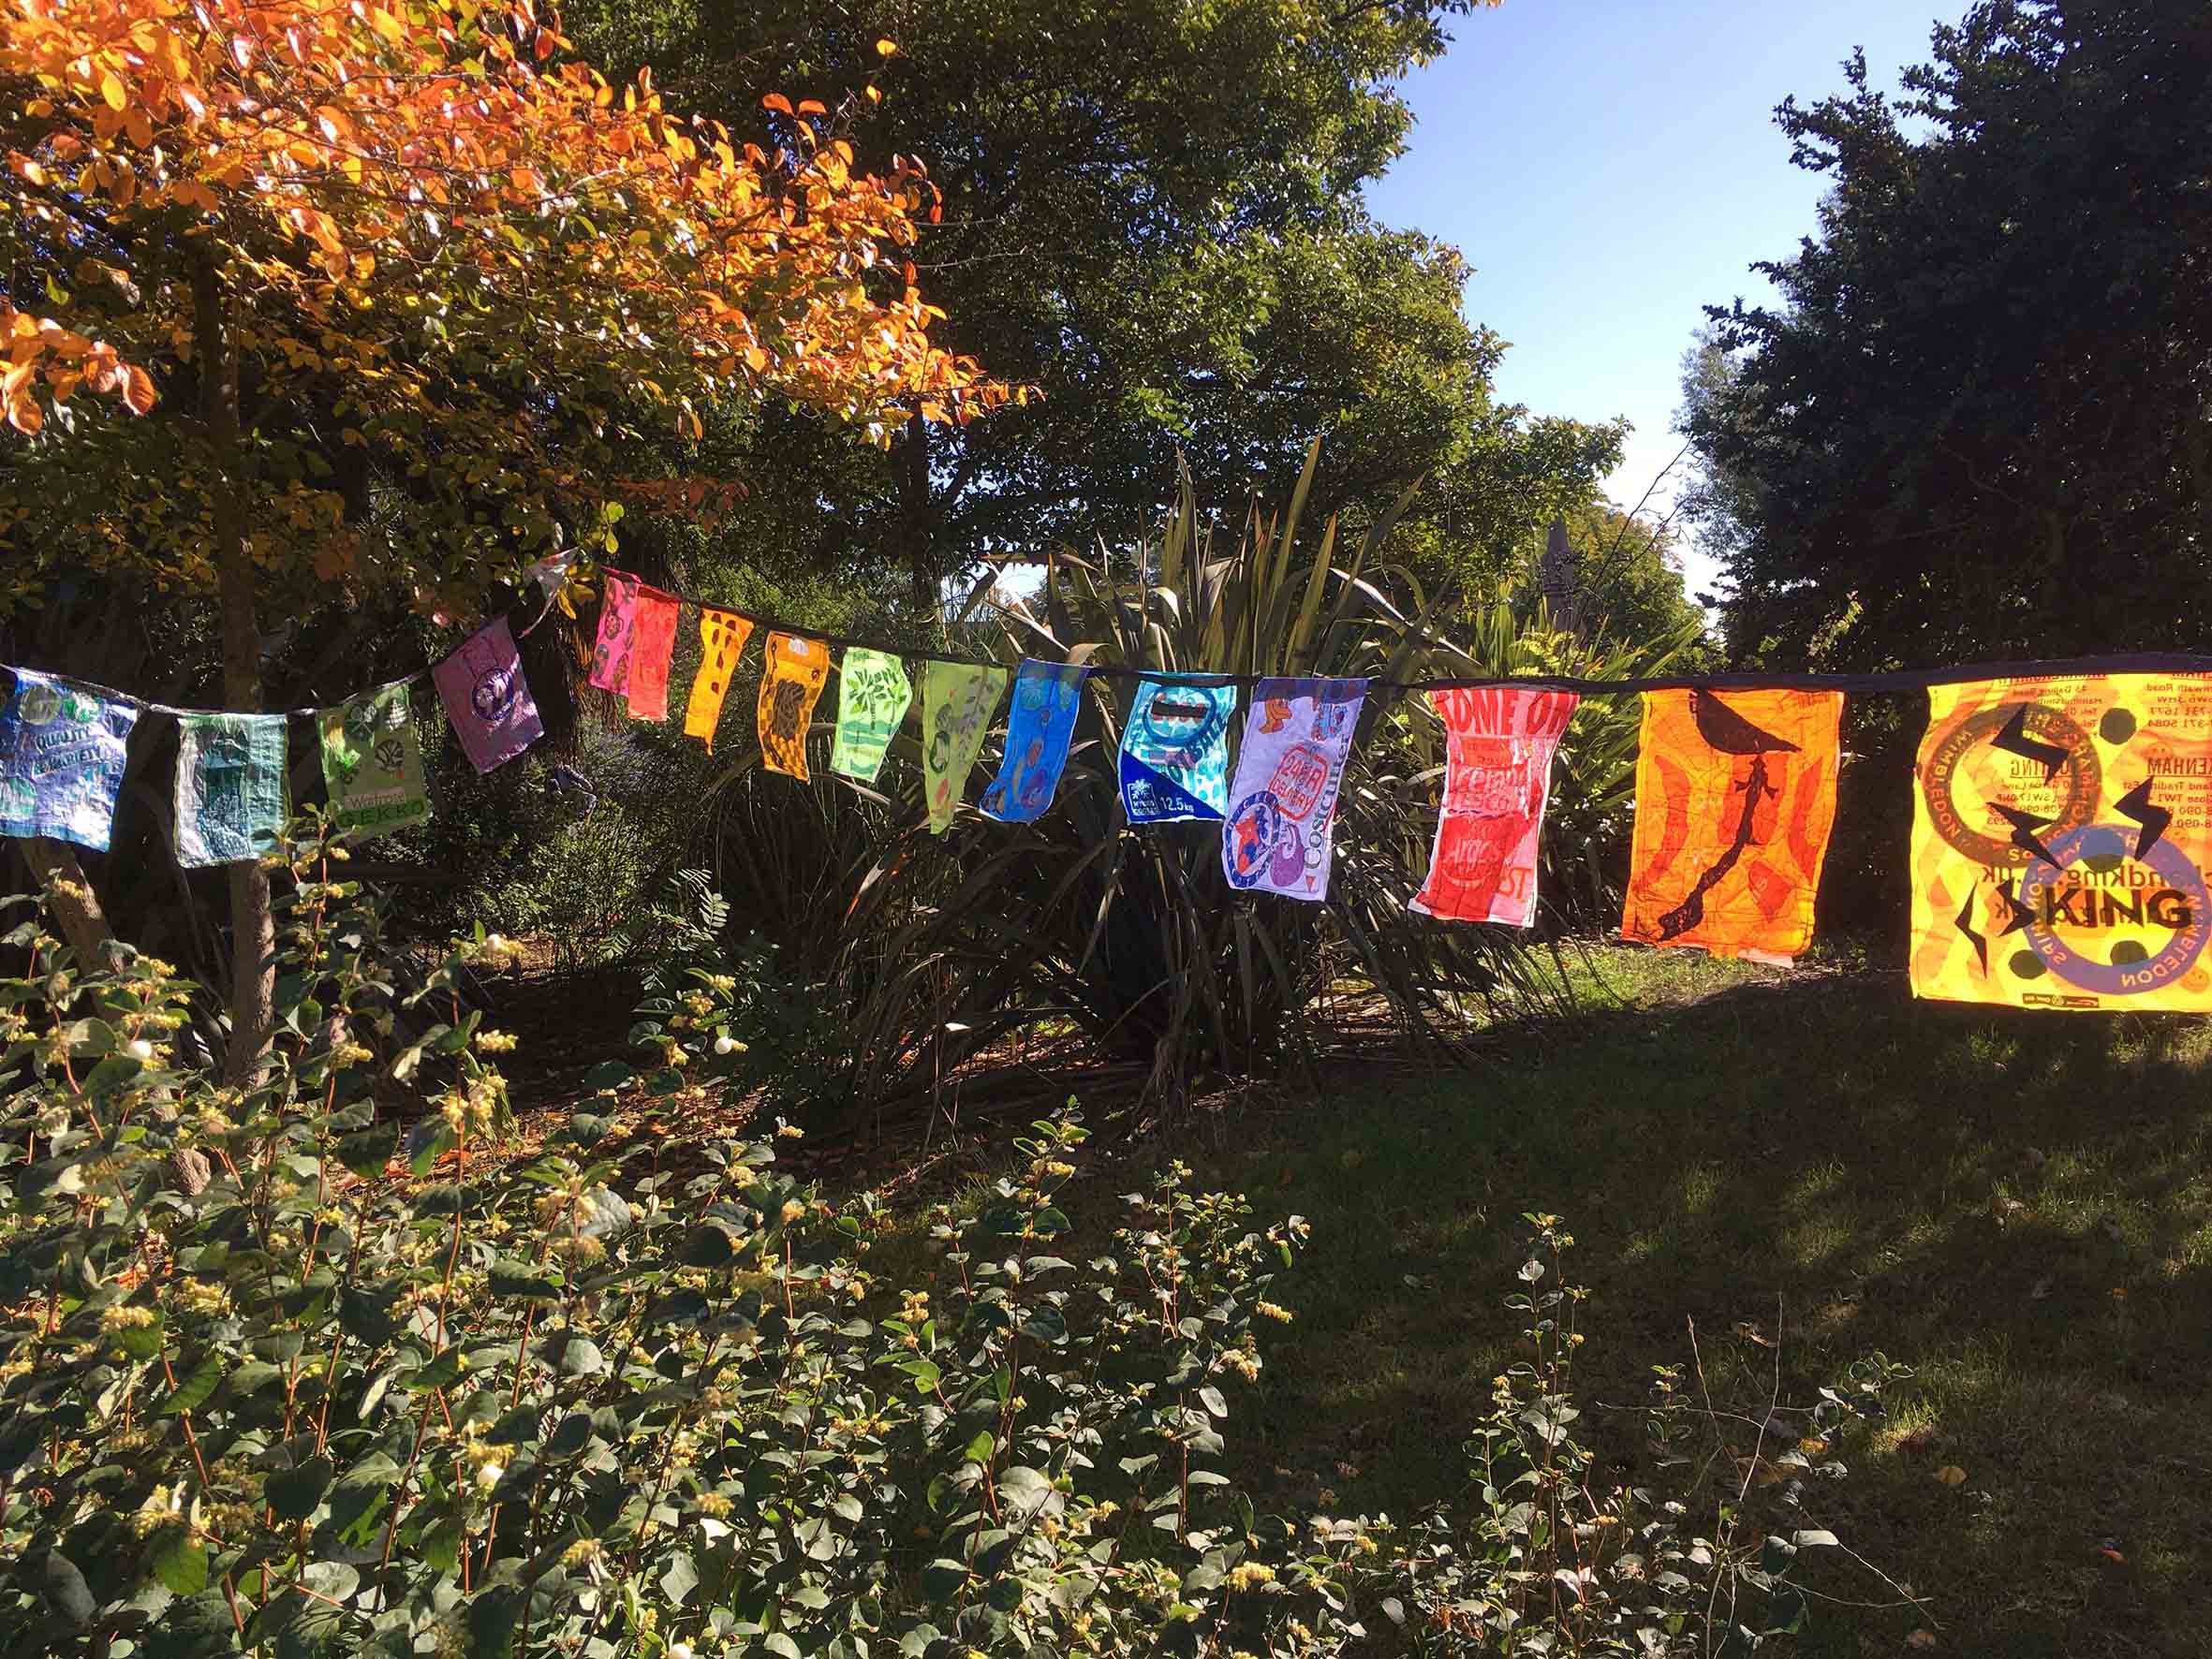 Prayer Flags made by families affected by Grenfell Fire 2017.